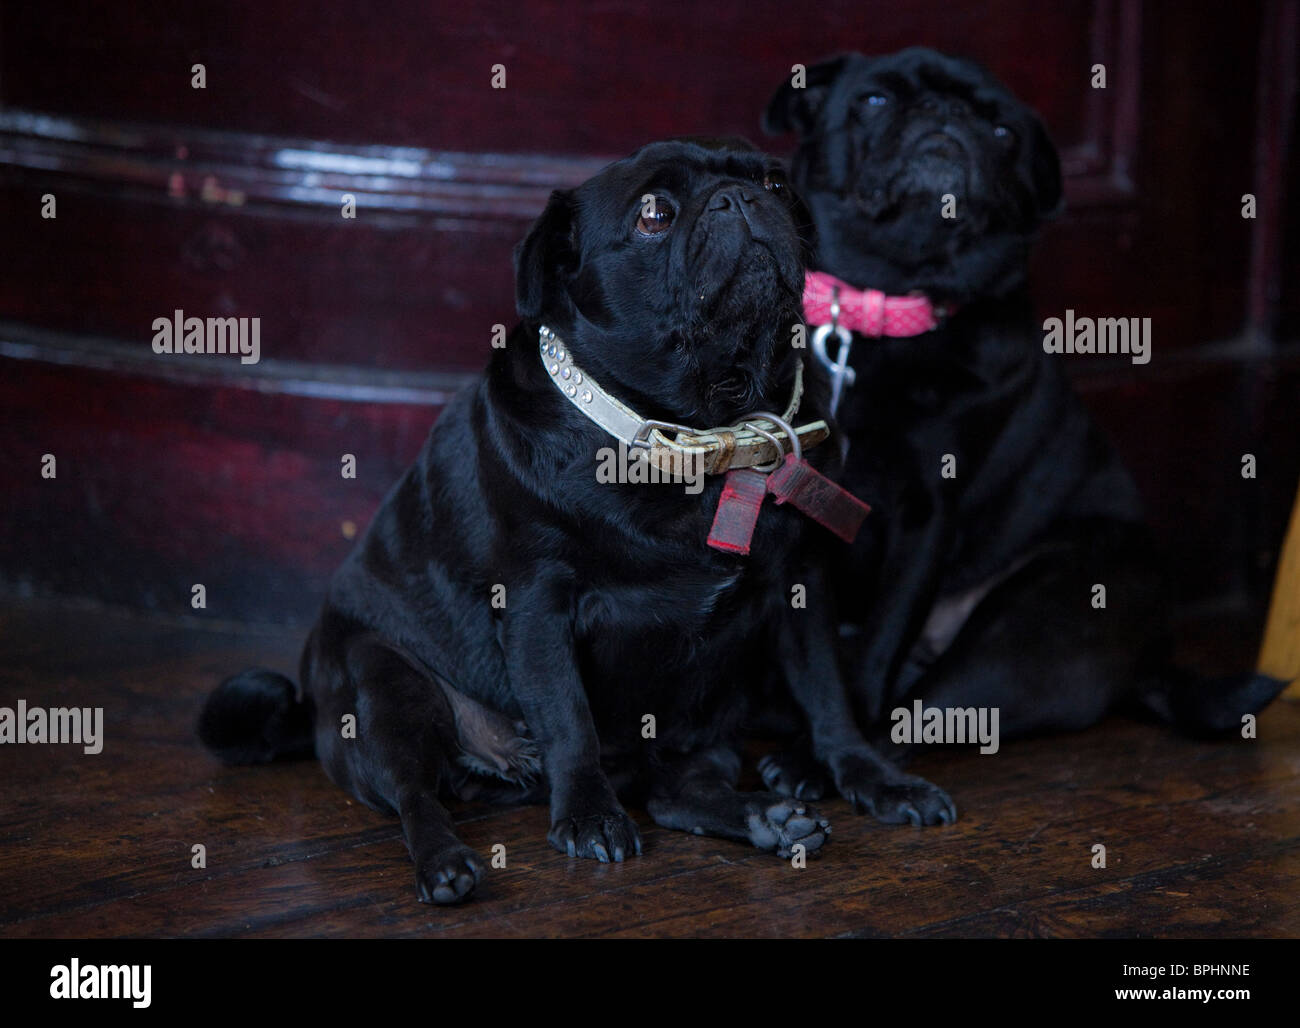 Two dogs seated Stock Photo